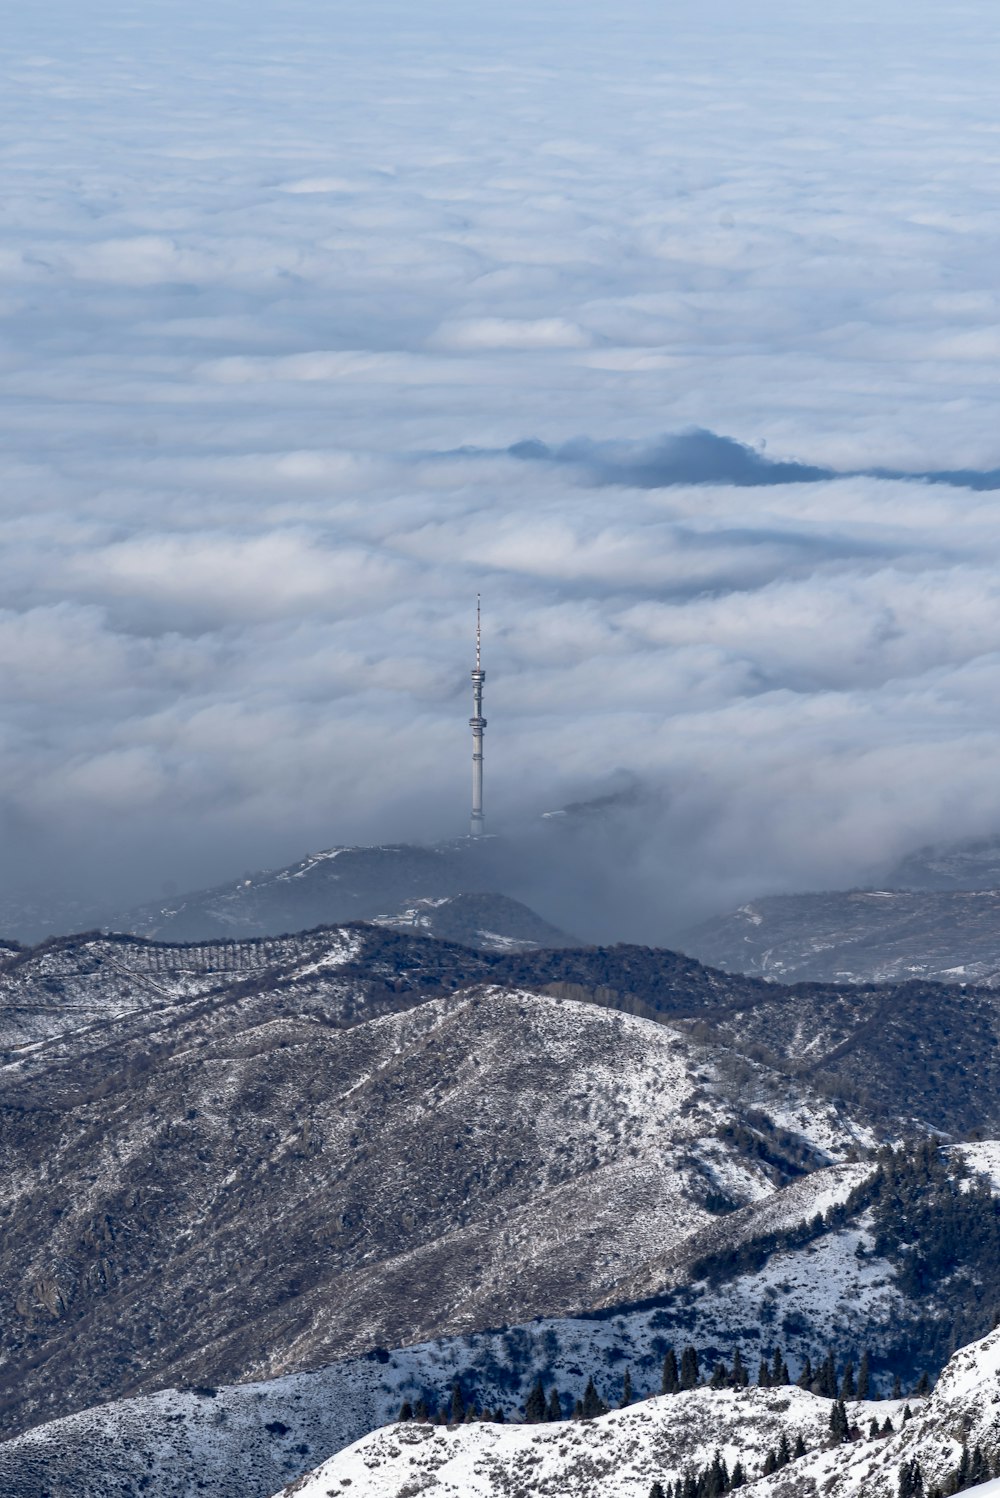 a view of a mountain with a radio tower in the distance